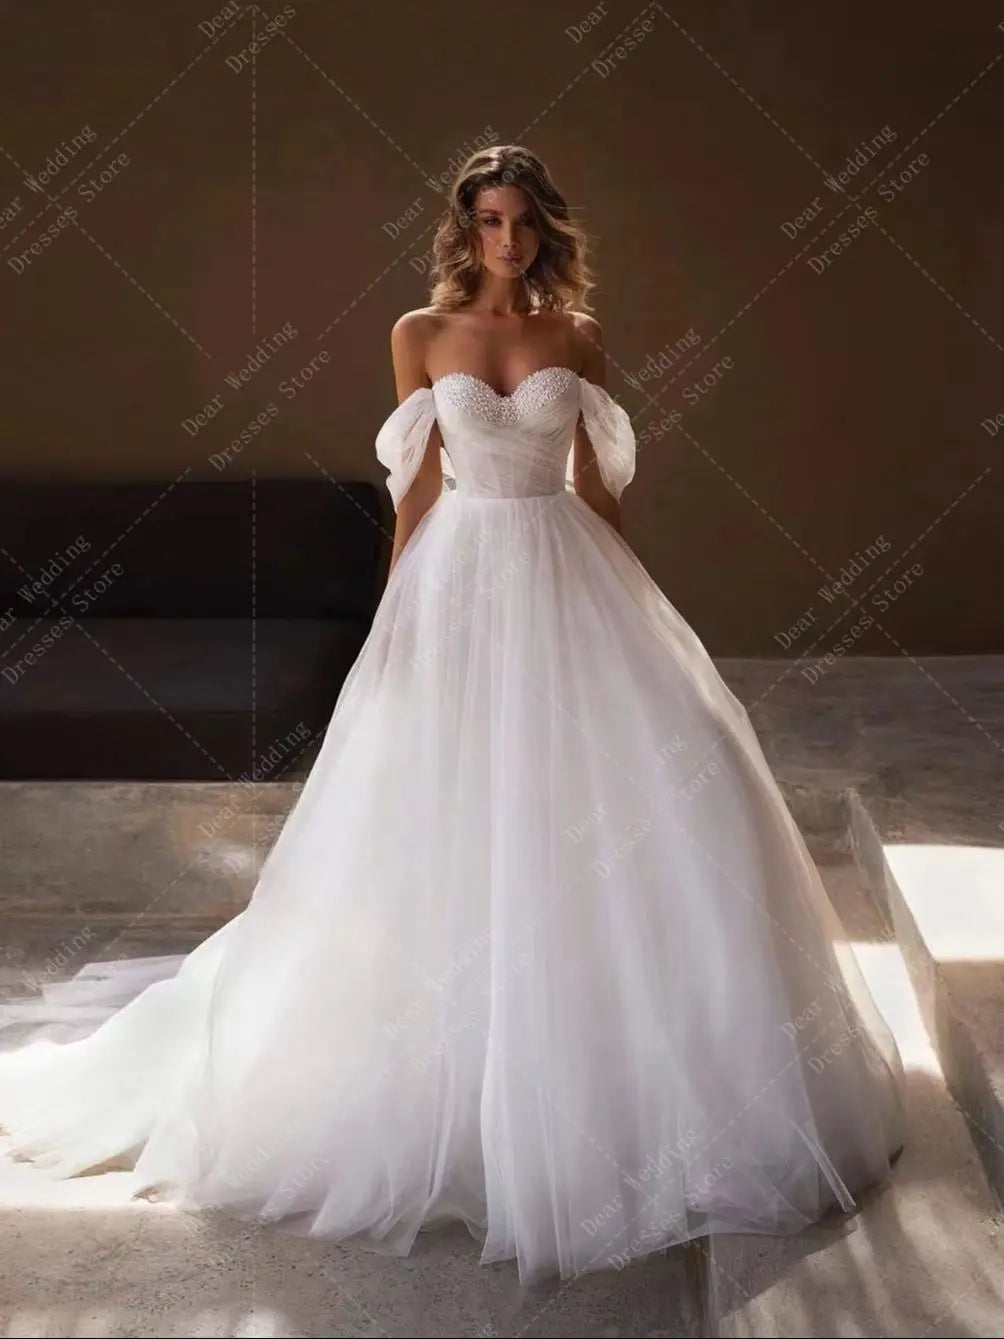 Luxury Princess Lace Beading Wedding Dresses Woman's A Line Sweetheart Off The Shoulder Bride Gowns Elegant Formal Party Vestido